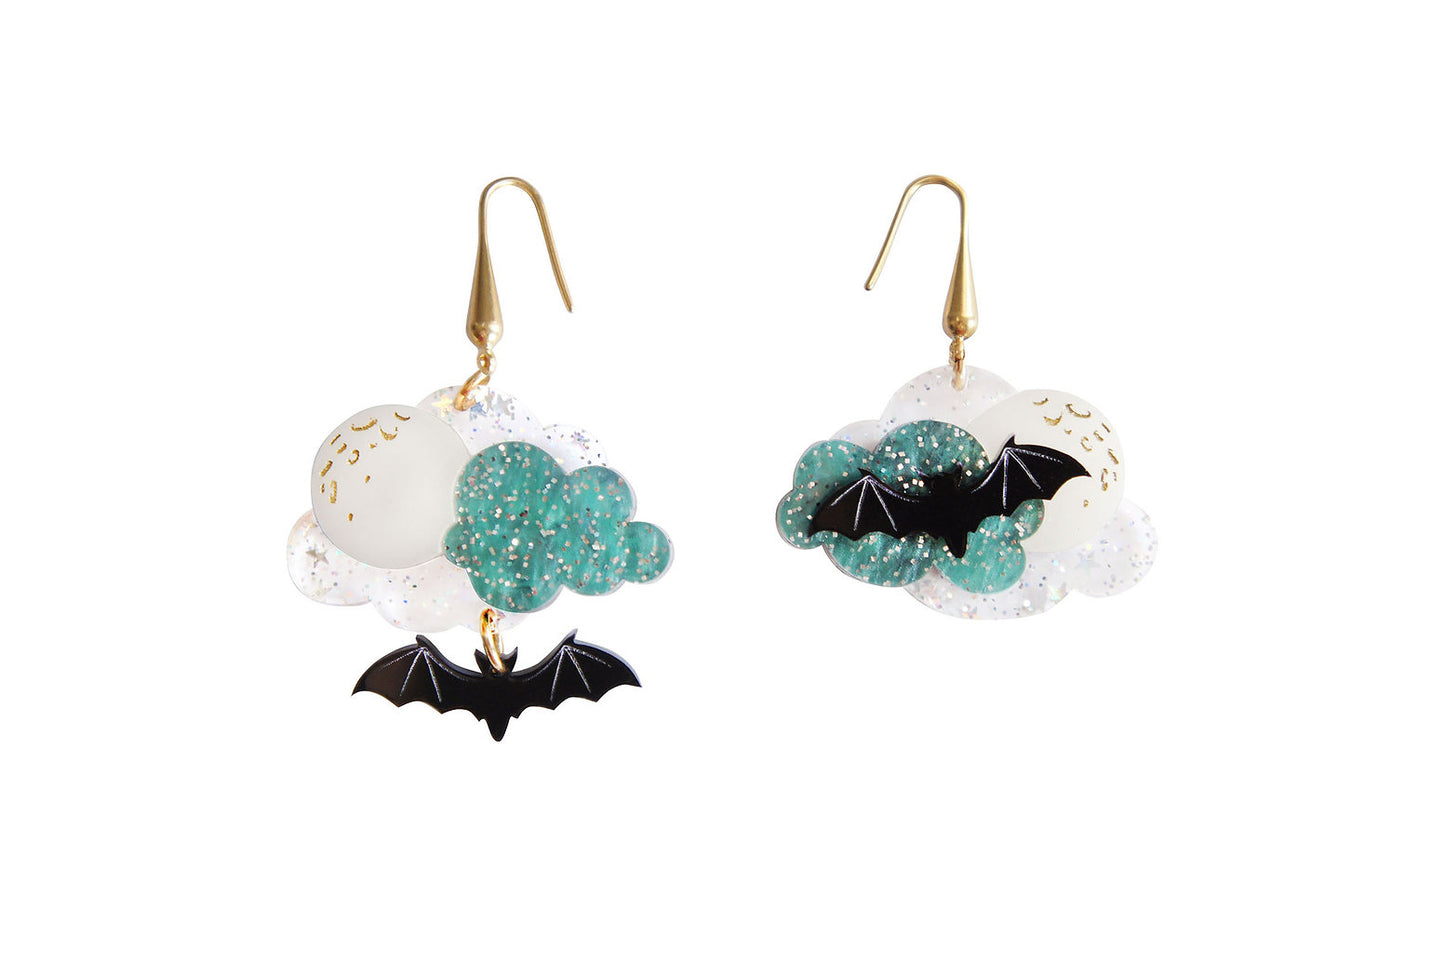 Clouds and Bats Earrings by LaliBlue